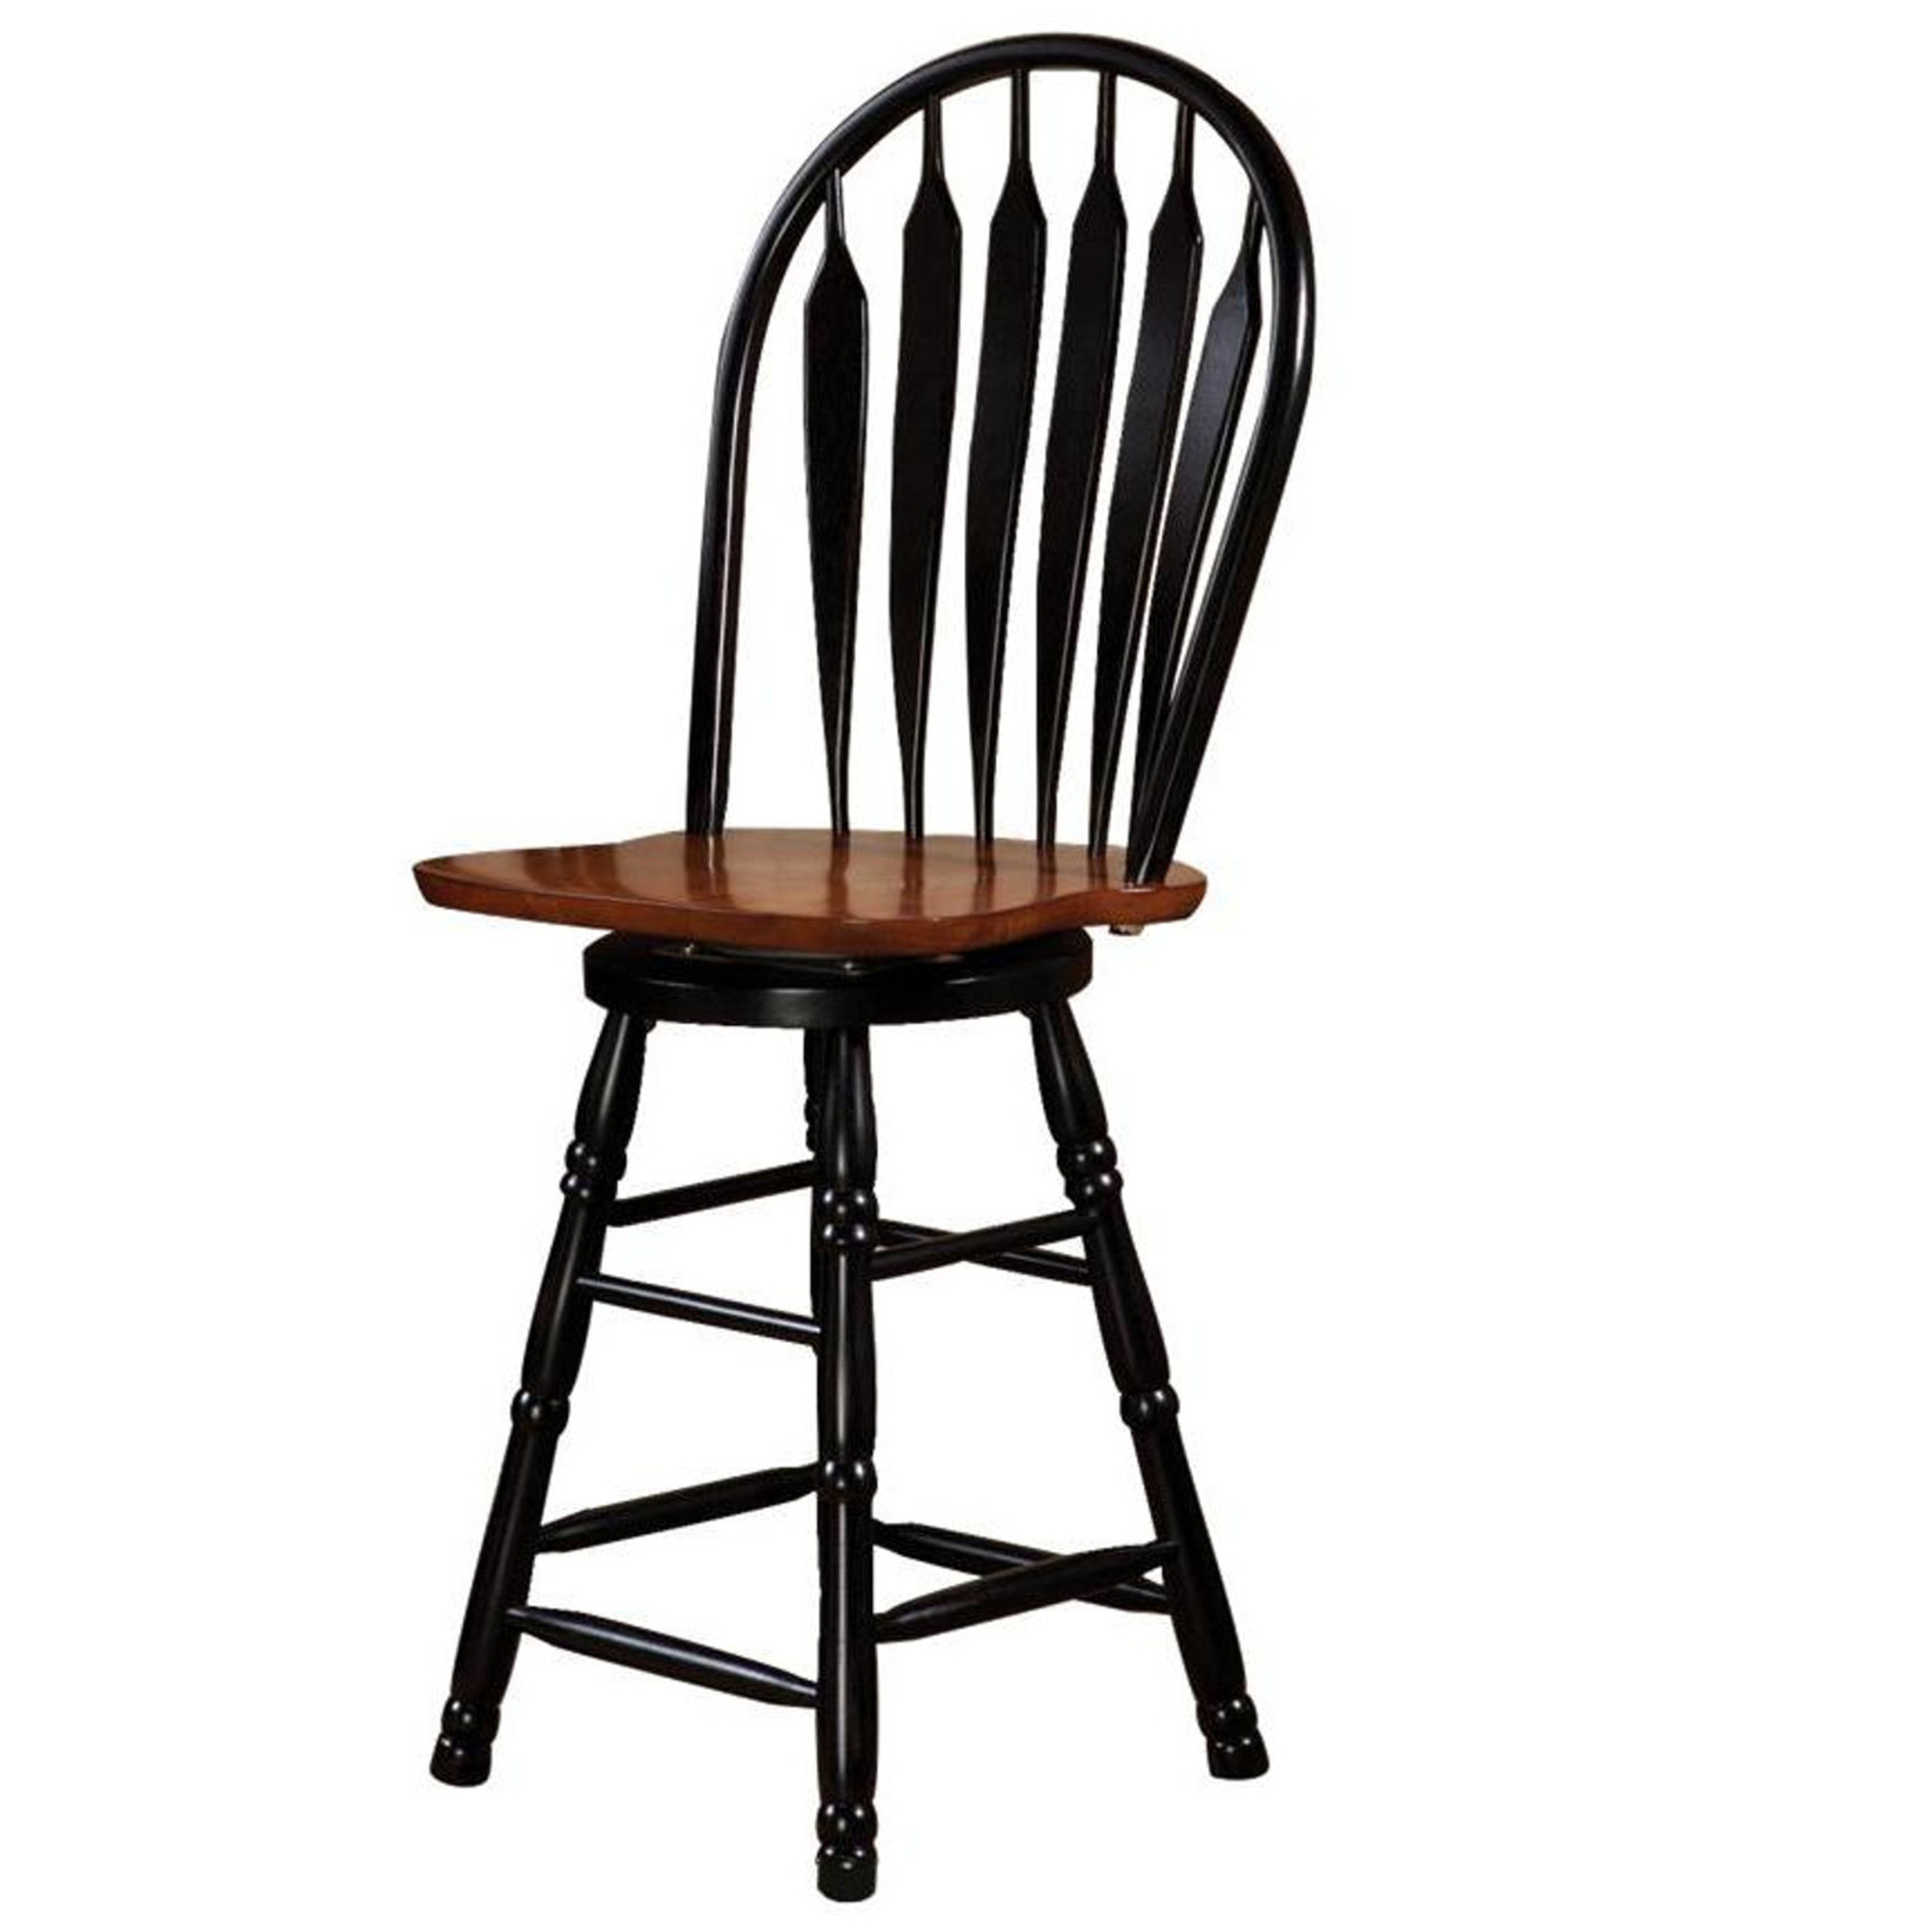 Black Cherry Selections 44.5 in. High Back Wood Frame 24 in. Bar Stool - Distressed Antique Black with Cherry